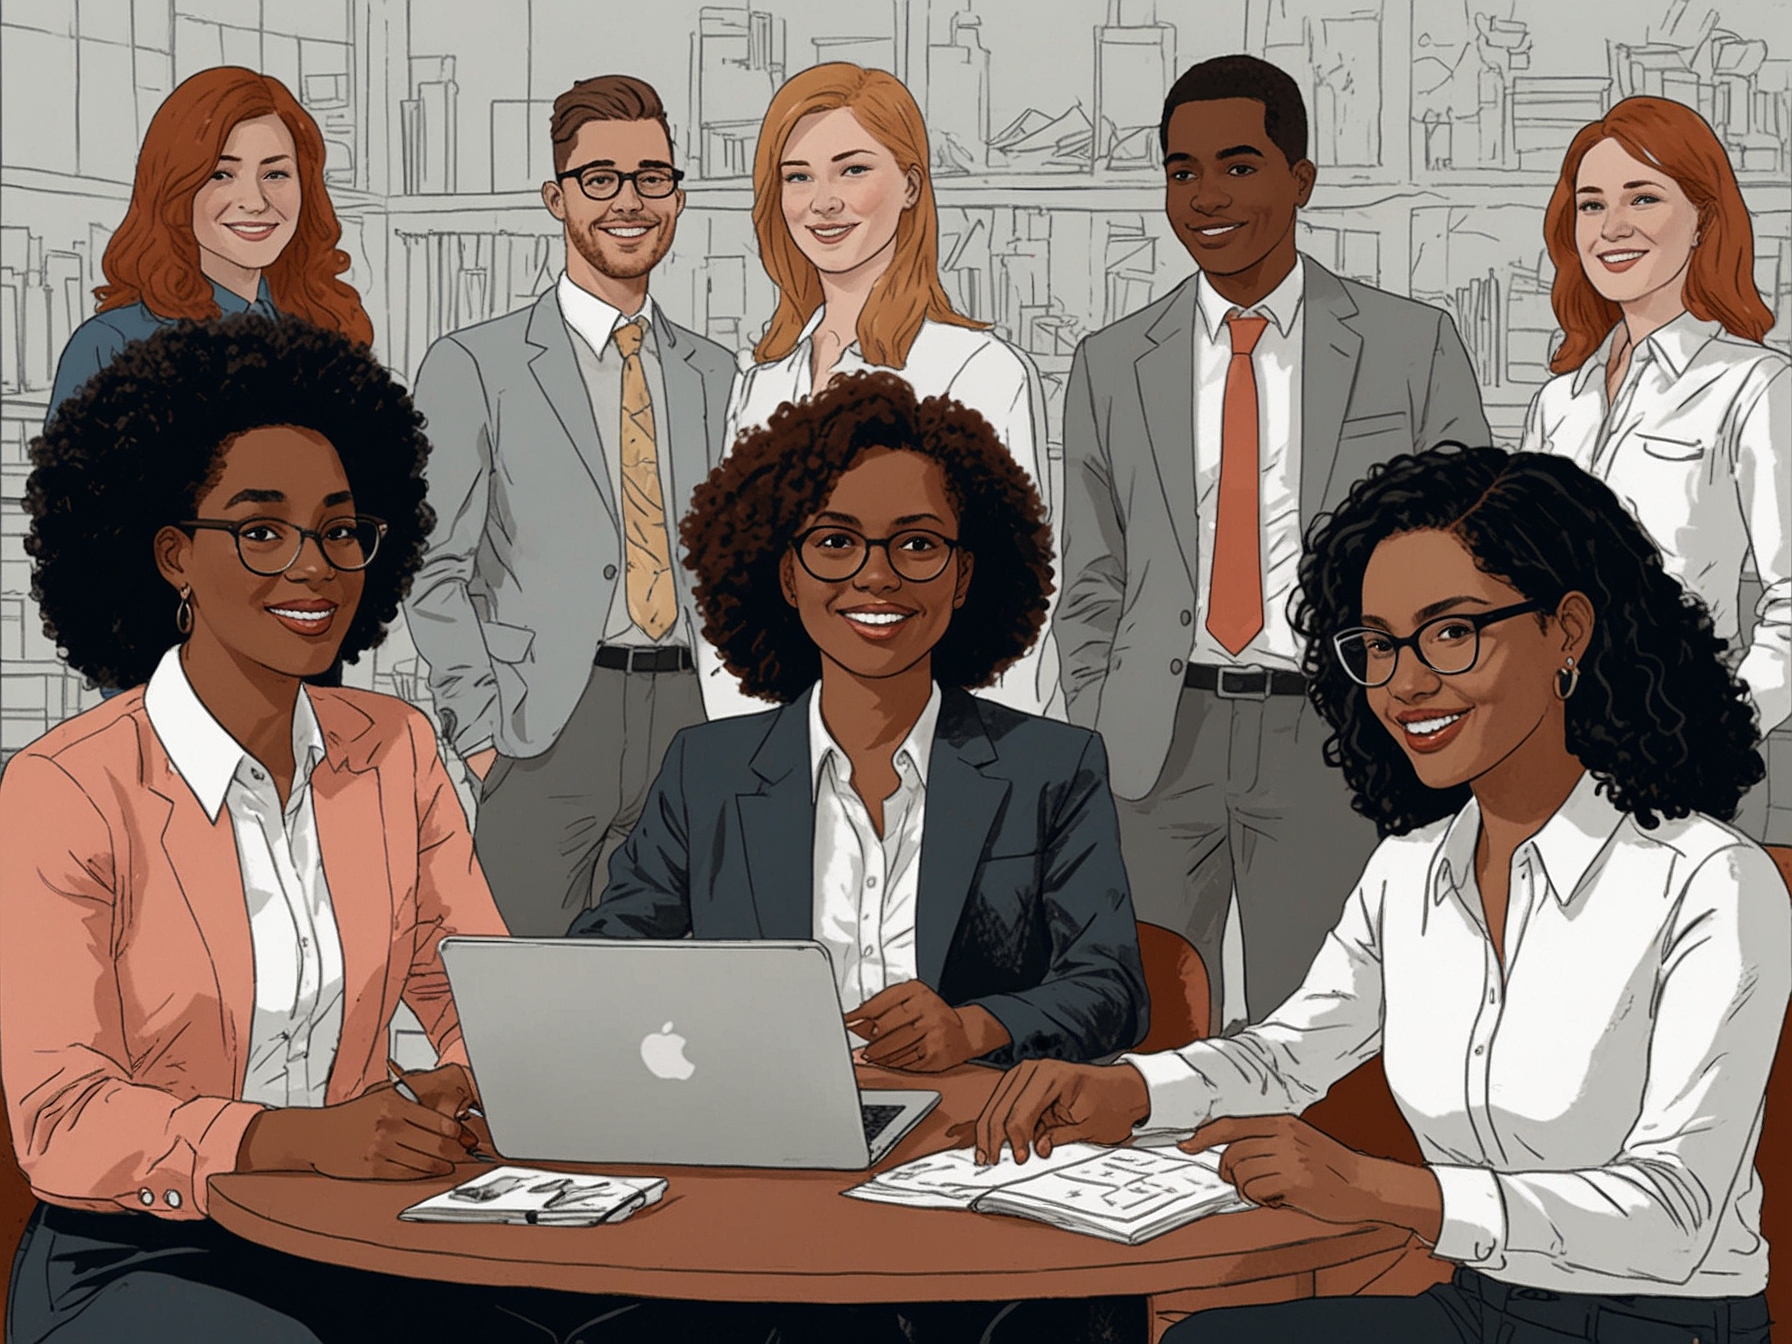 An illustration showing a diverse group of employees in a work environment, highlighting the importance of gender equity and inclusive workplace practices in the tech industry.